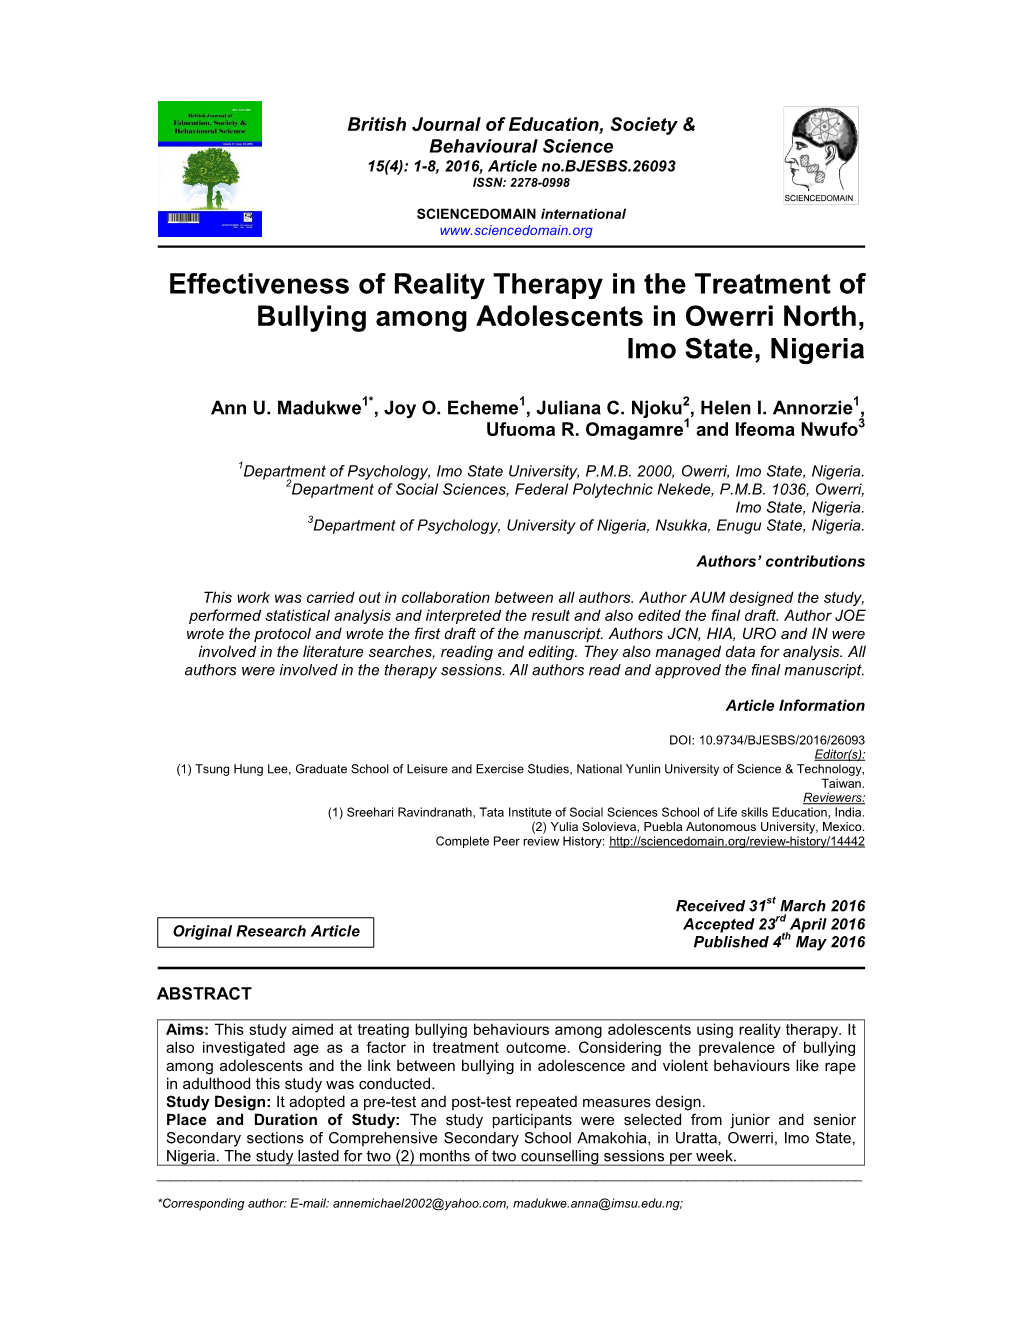 Effectiveness of Reality Therapy in the Treatment of Bullying Among Adolescents in Owerri North, Imo State, Nigeria